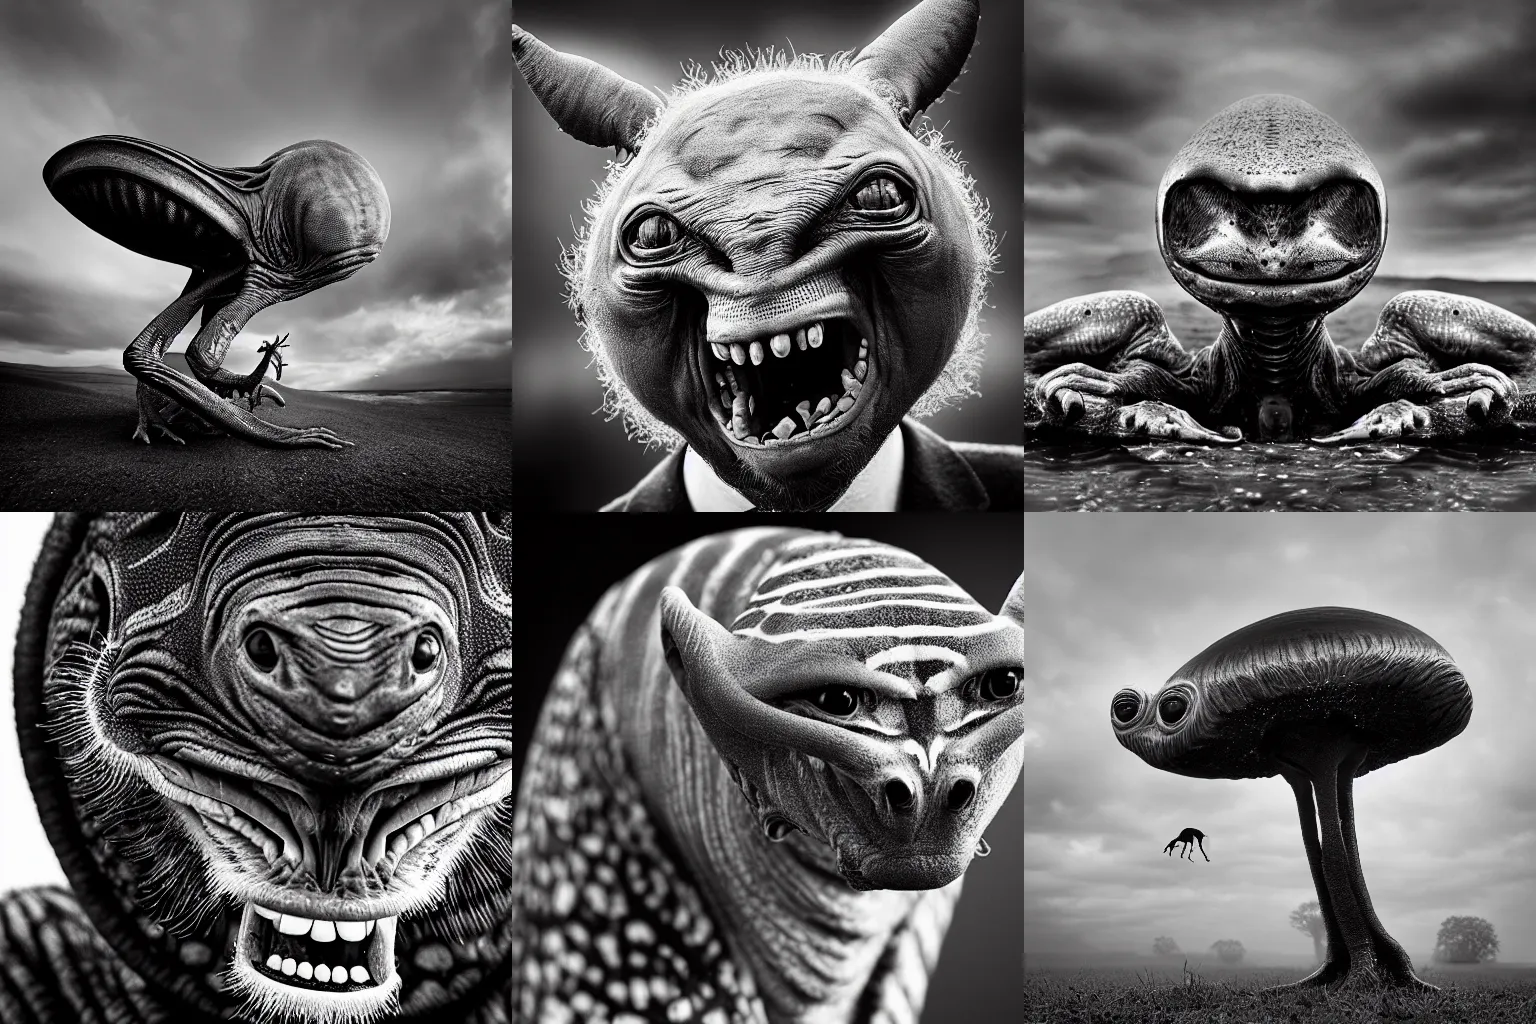 Prompt: Award winning nature photography of an alien by David Yarrow